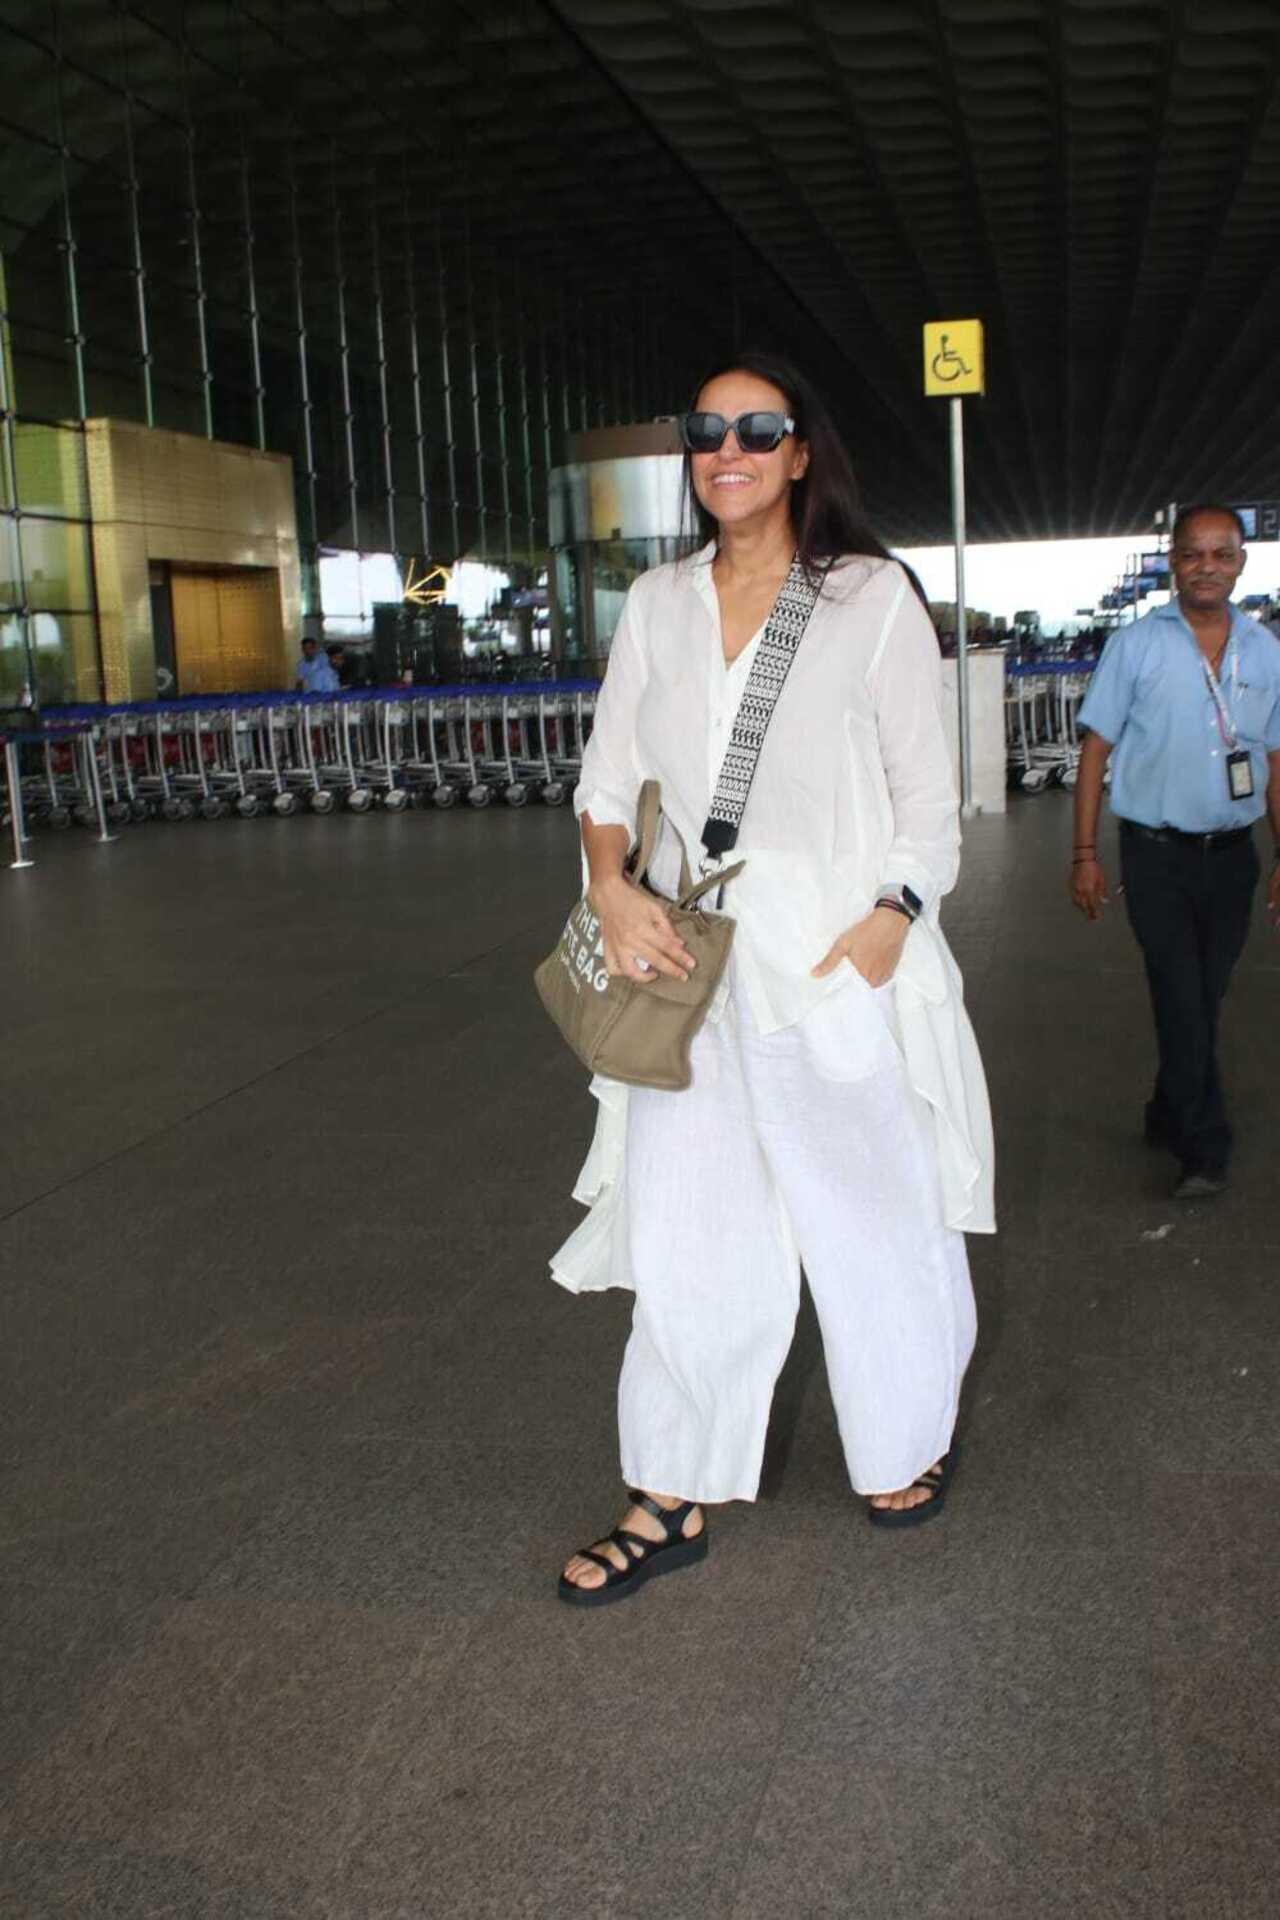 Neha Dhupia looked stunning as she chose an all-white outfit for her airport look